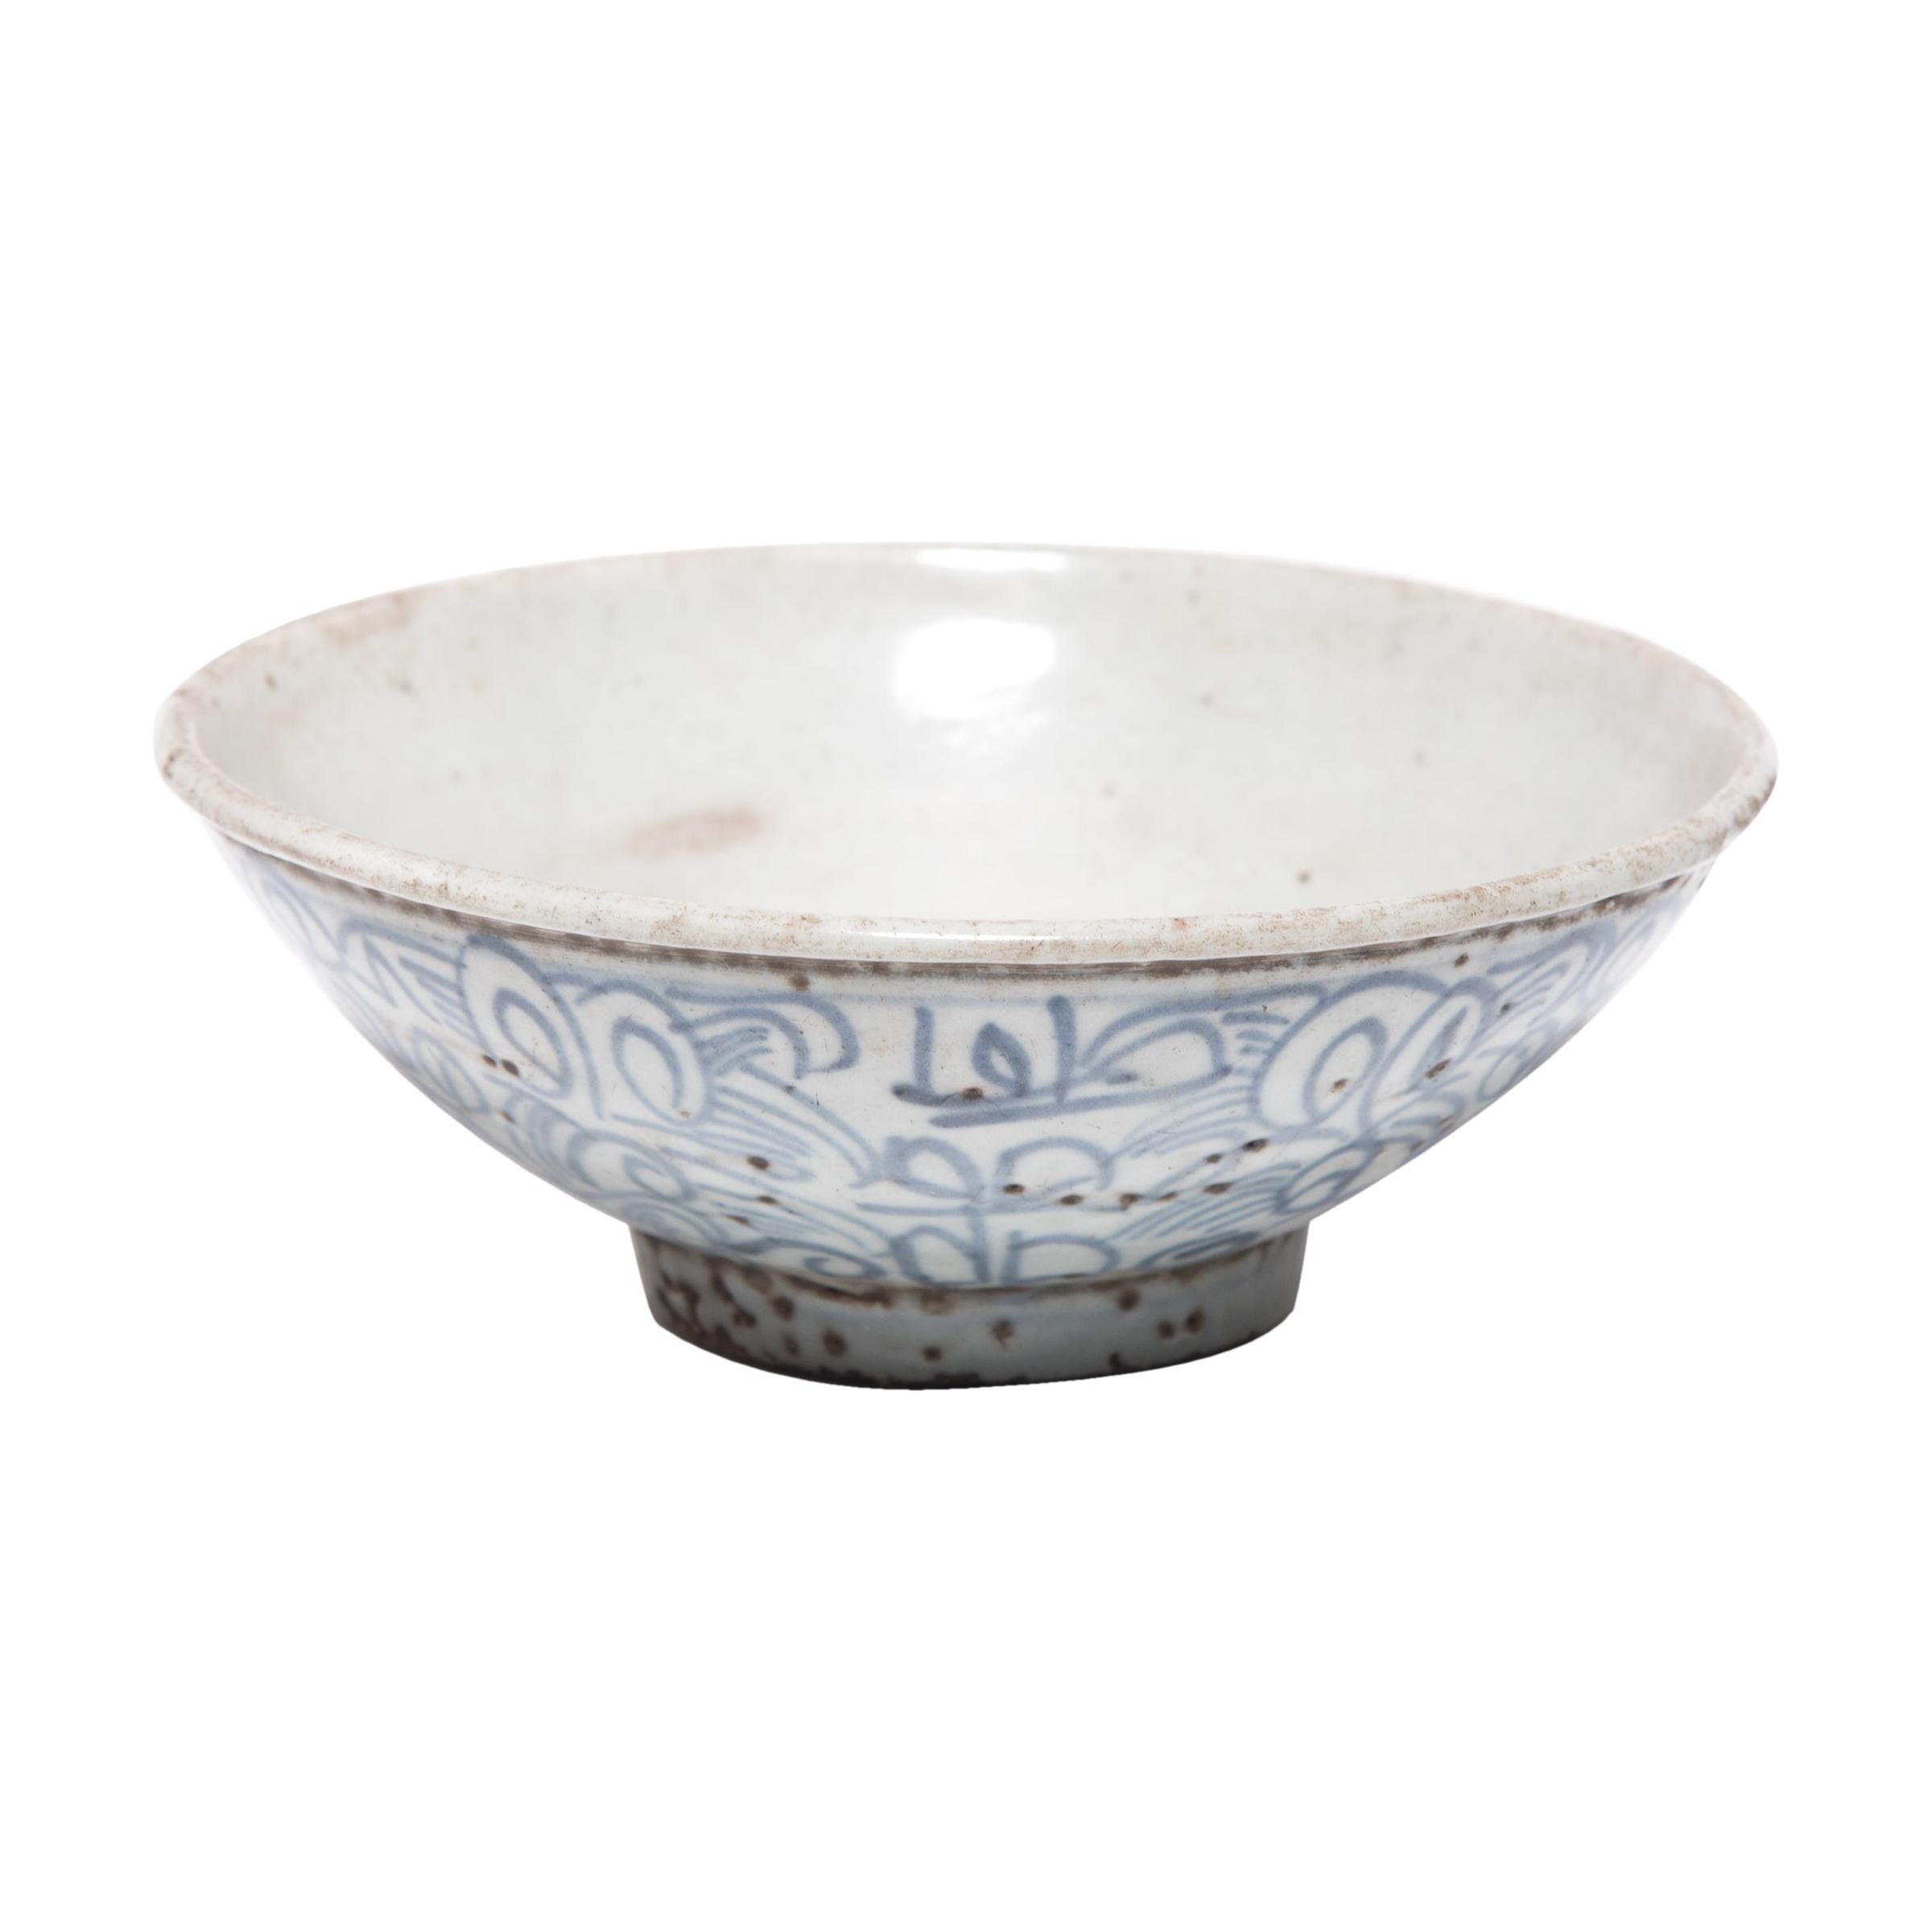 Chinese Blue and White Rice Bowl, c. 1900